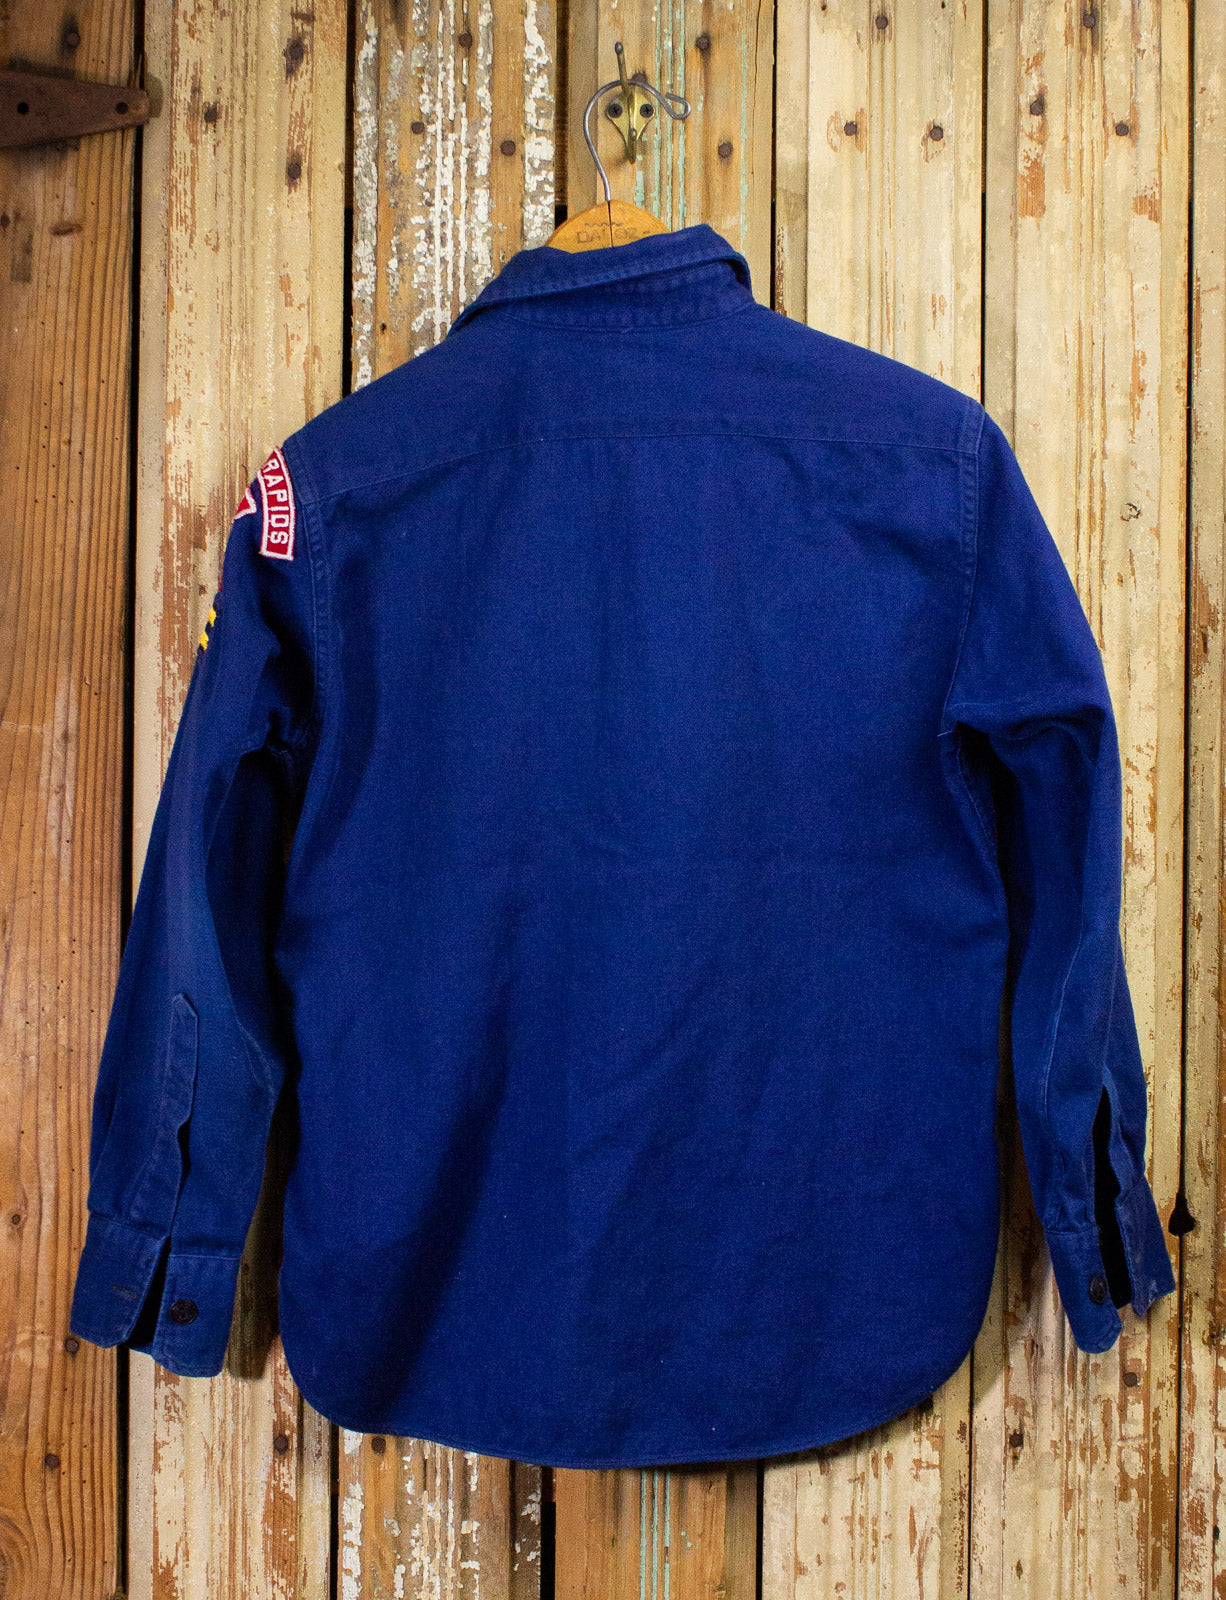 Vintage Boy Scouts of America Long Sleeve Shirt 60s Blue Small